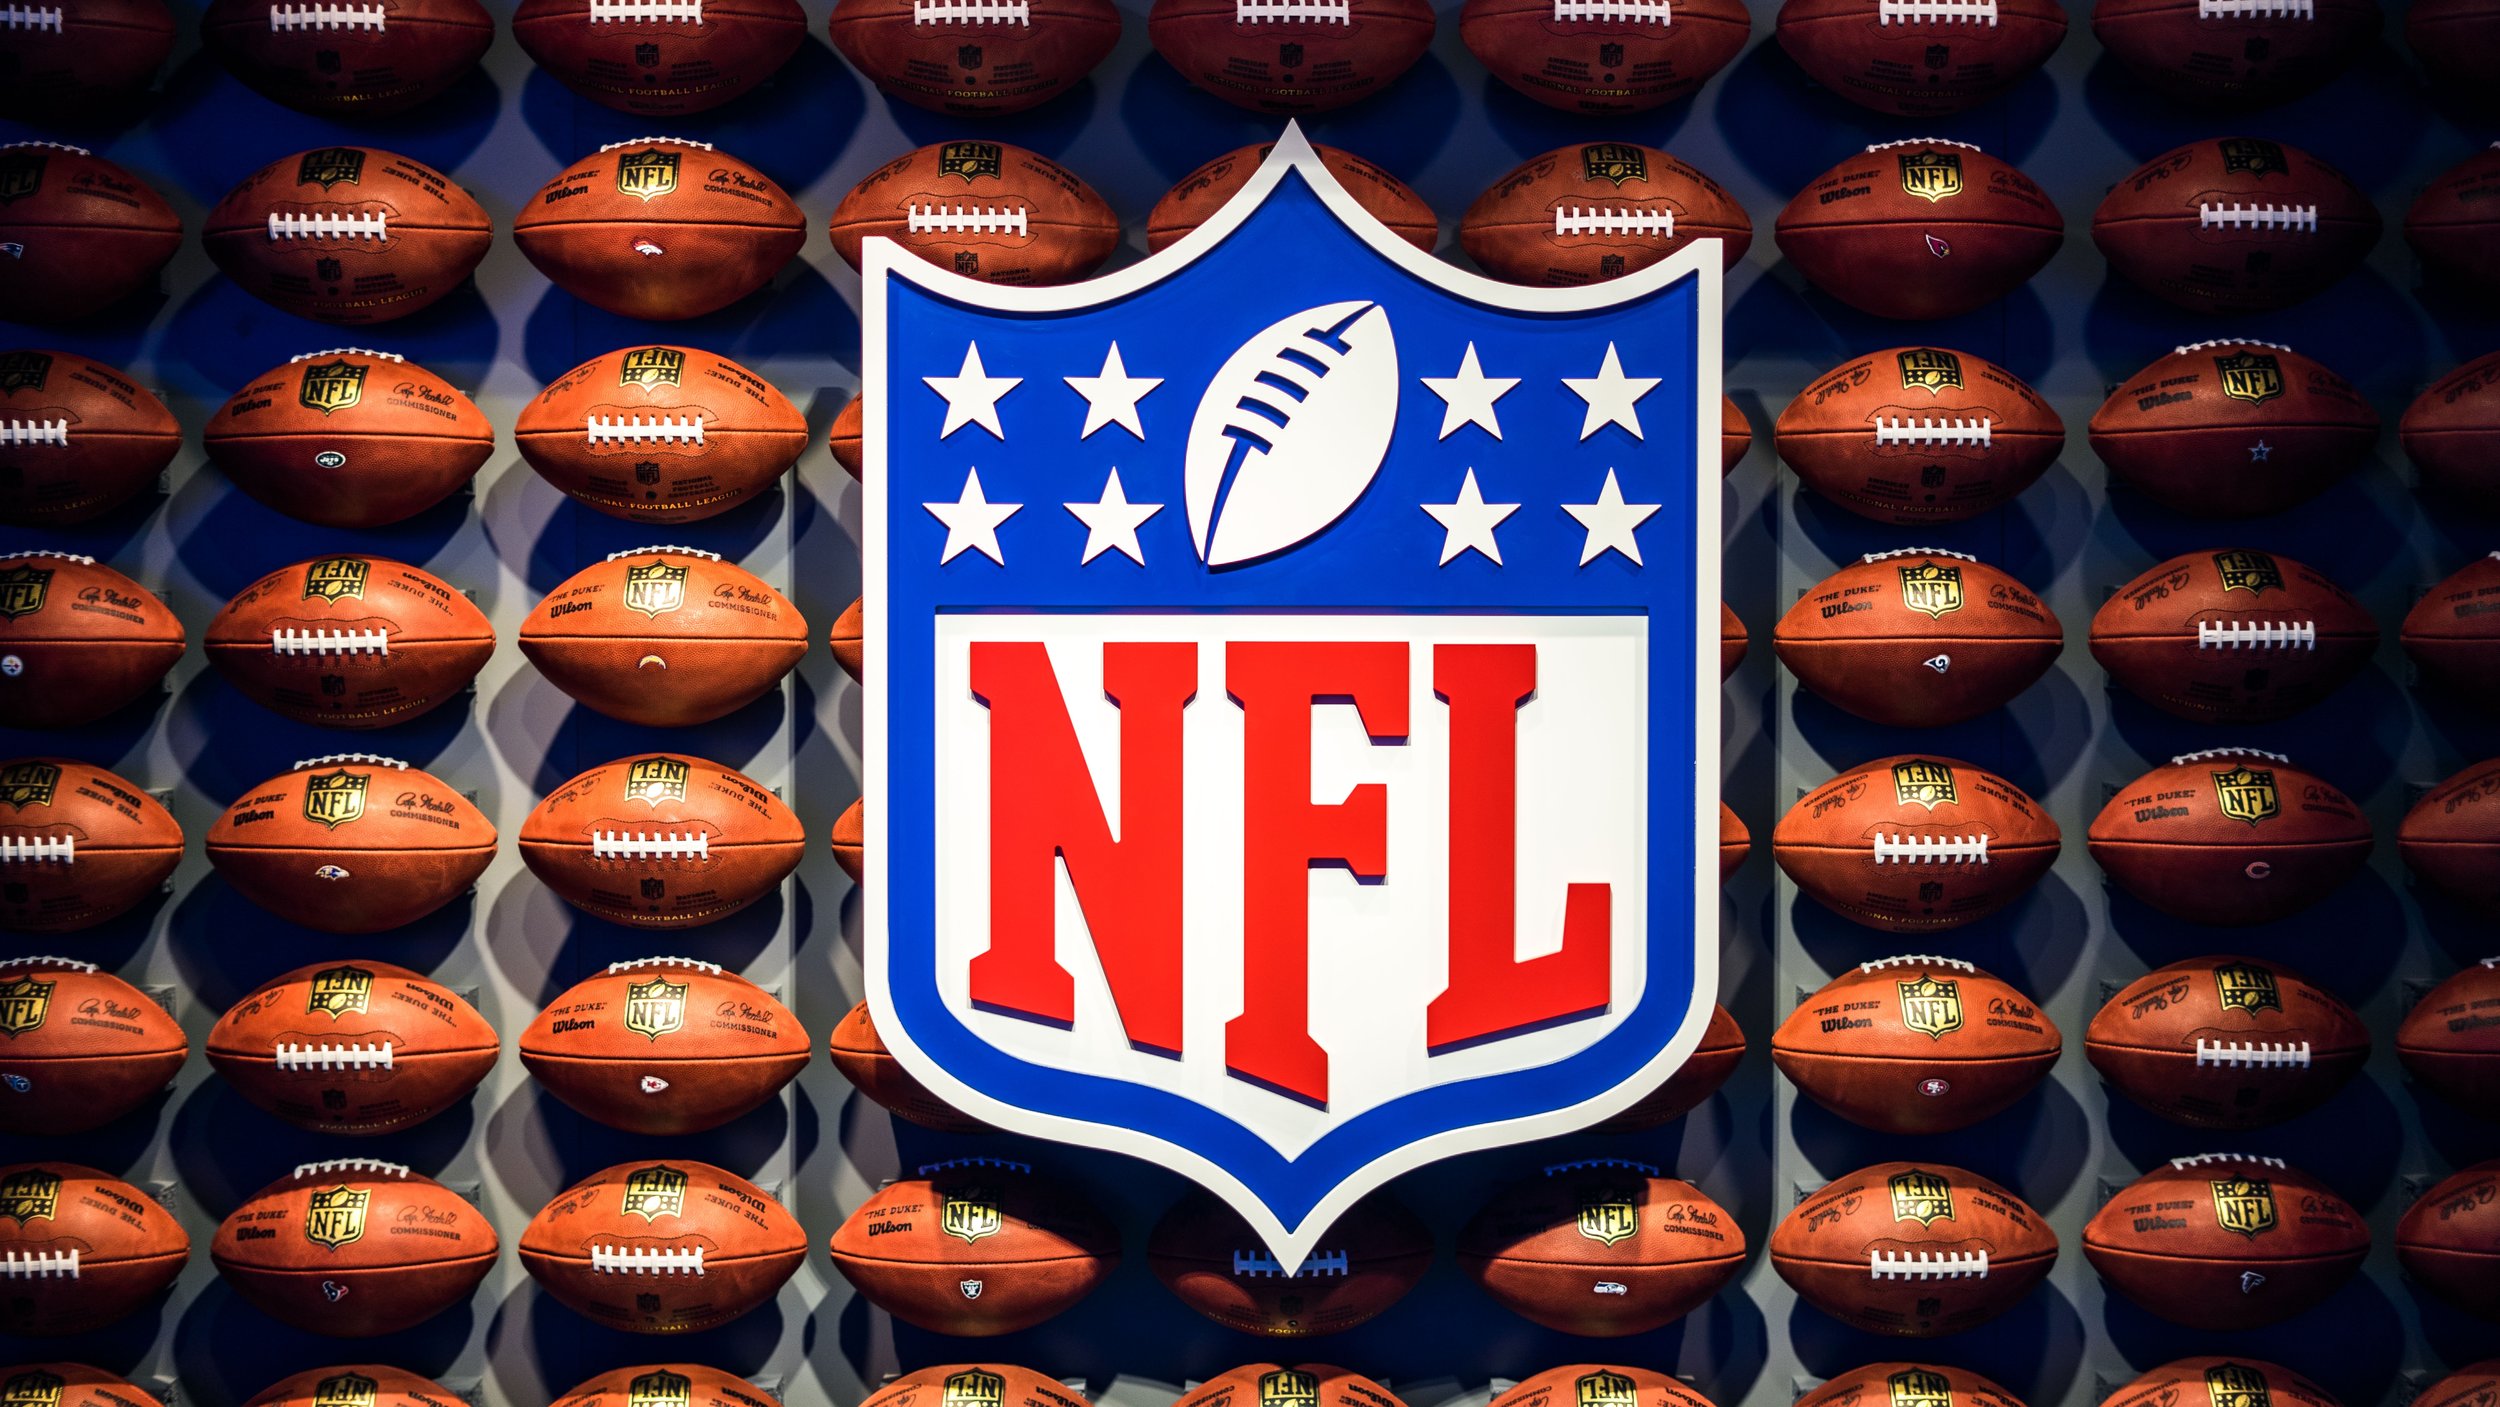 nfllogowithballs